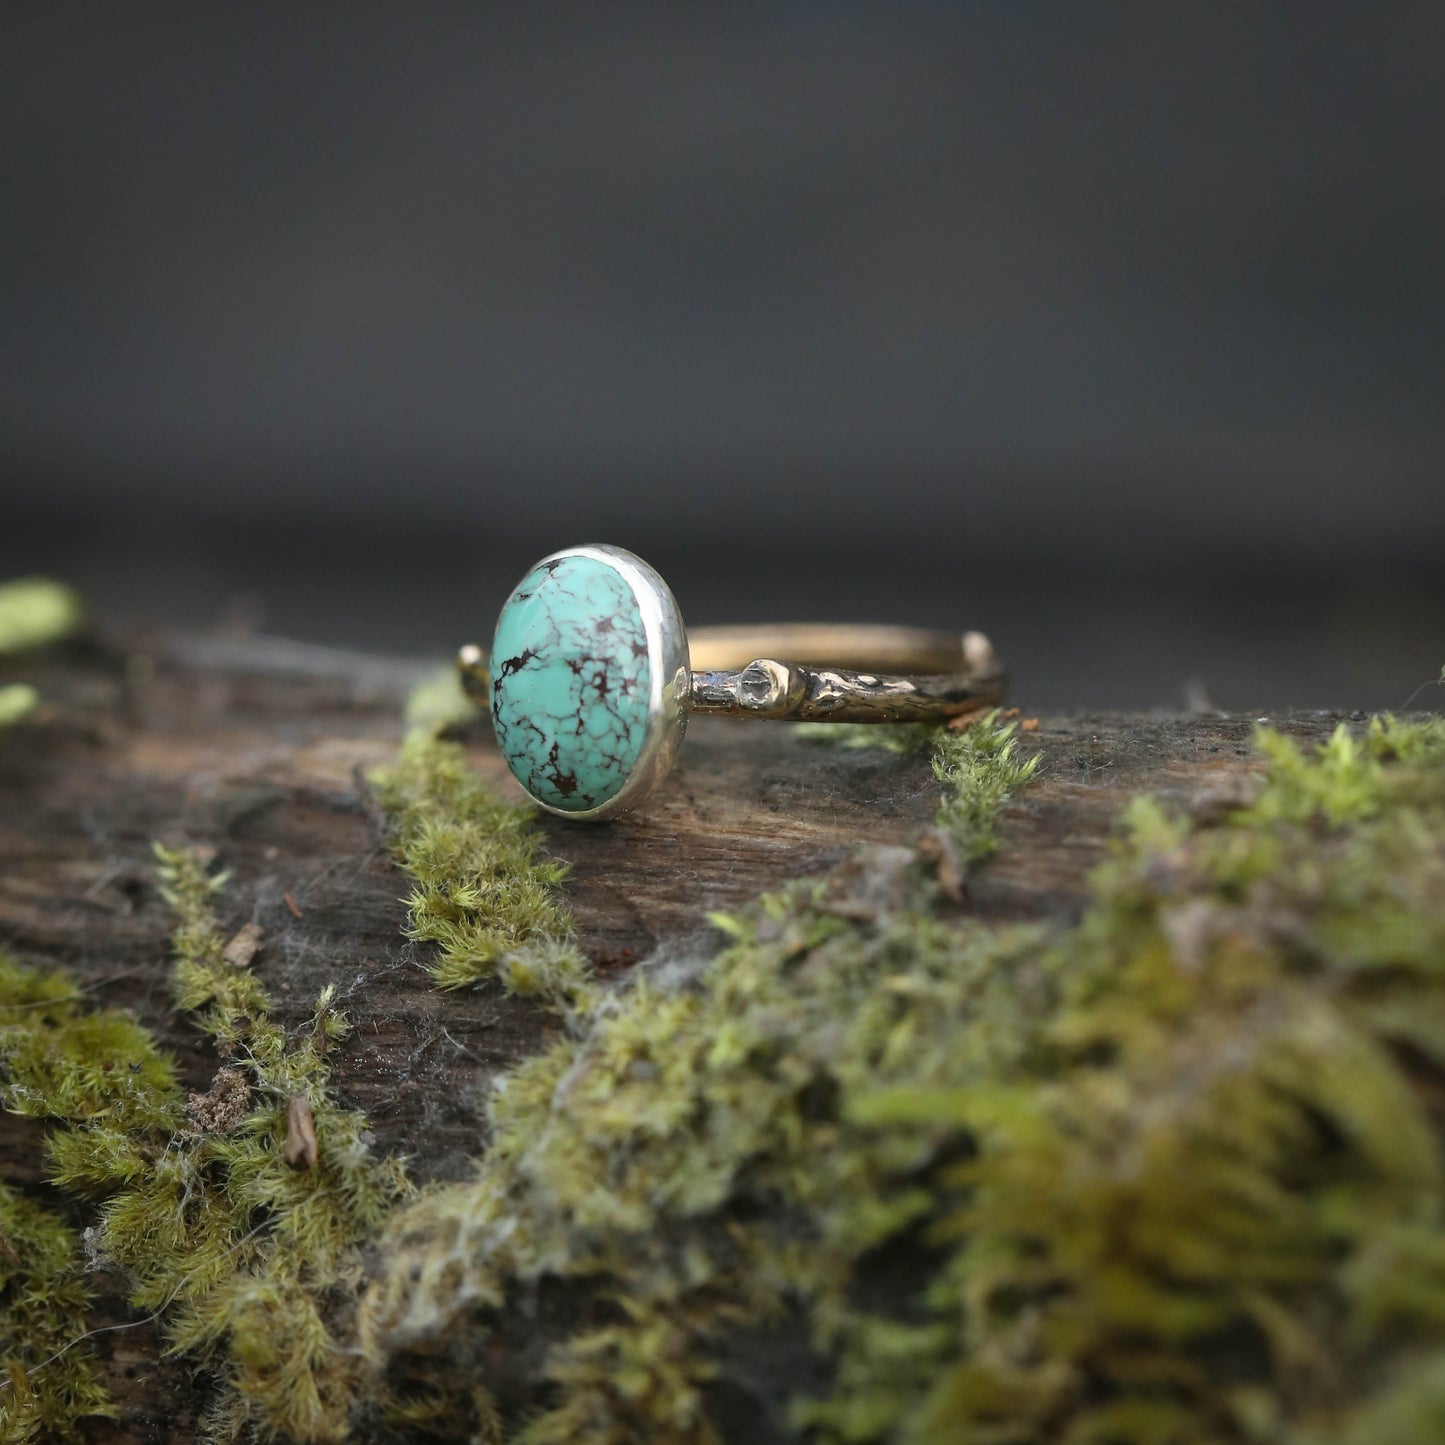 Woodland Twig Rings with Moonstone, Garnet, and Turquoise